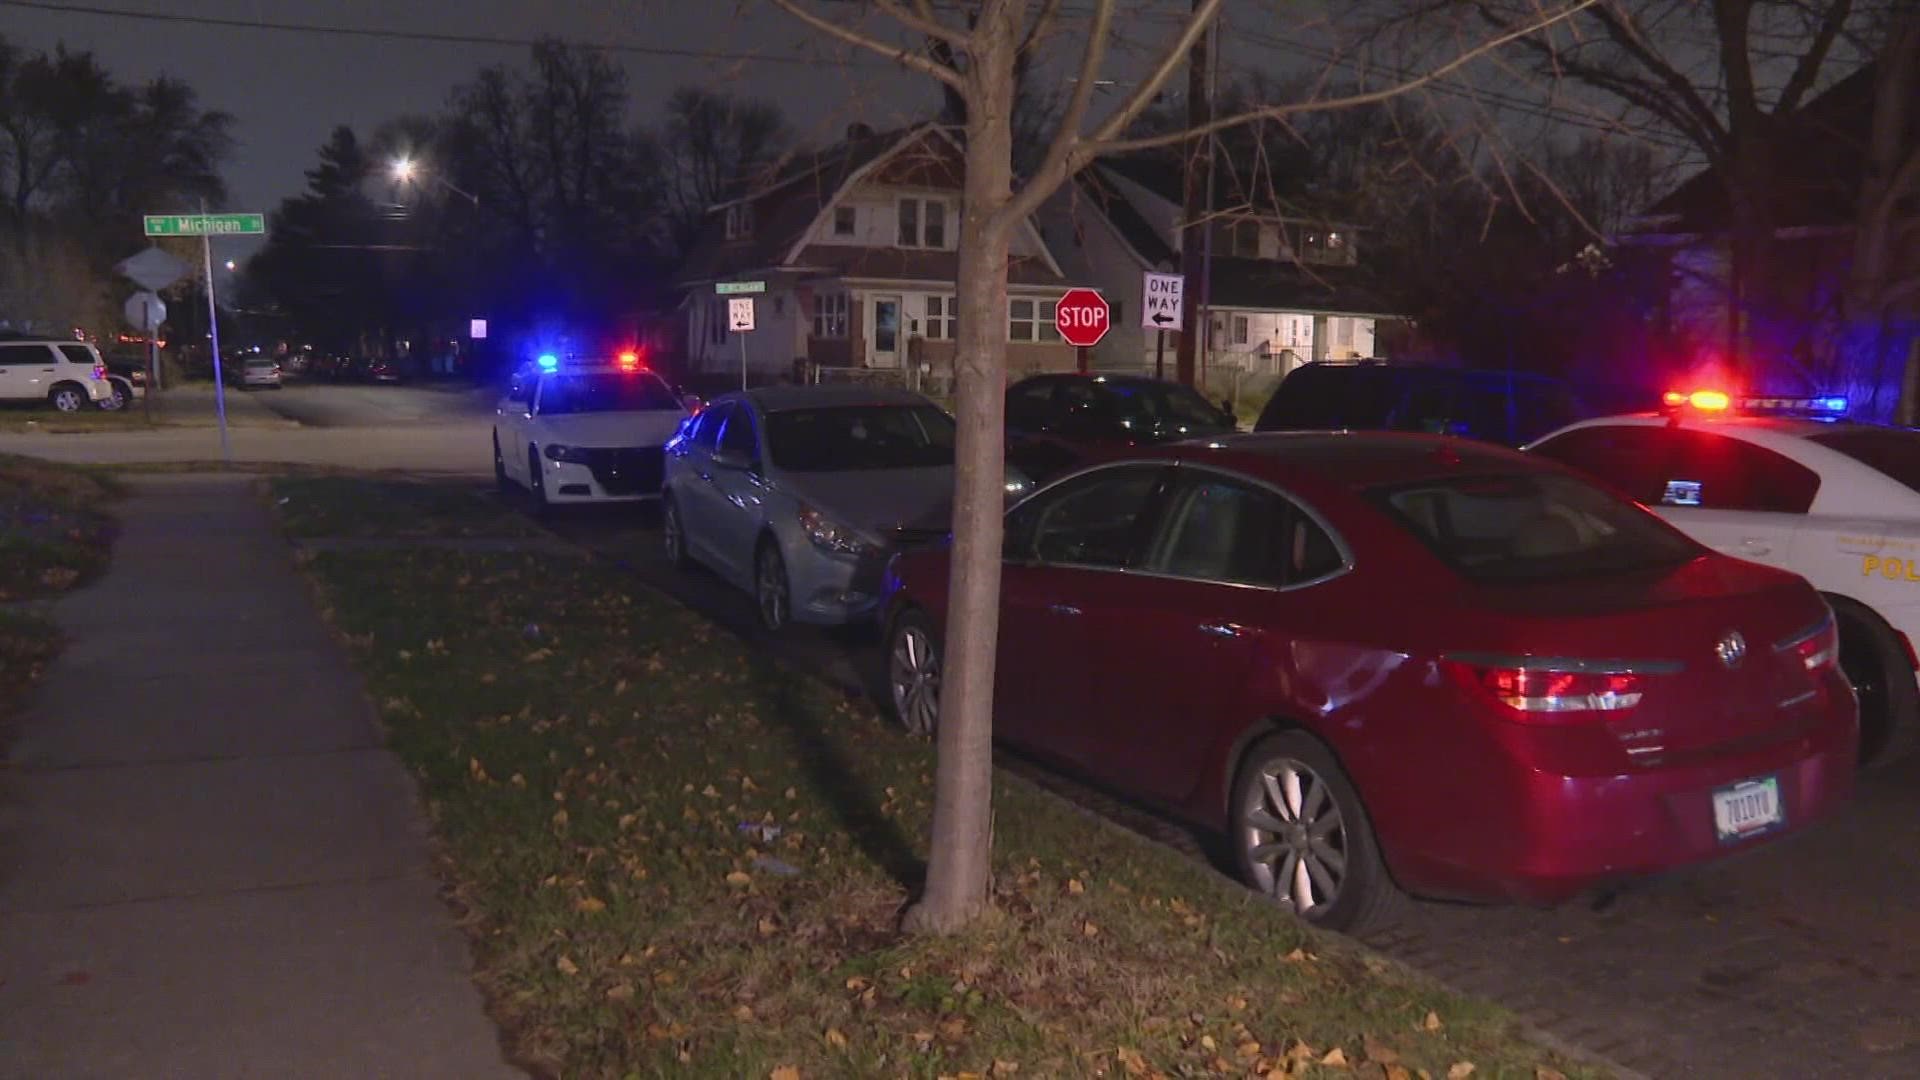 IMPD said a woman was wounded in the 10 p.m. incident.